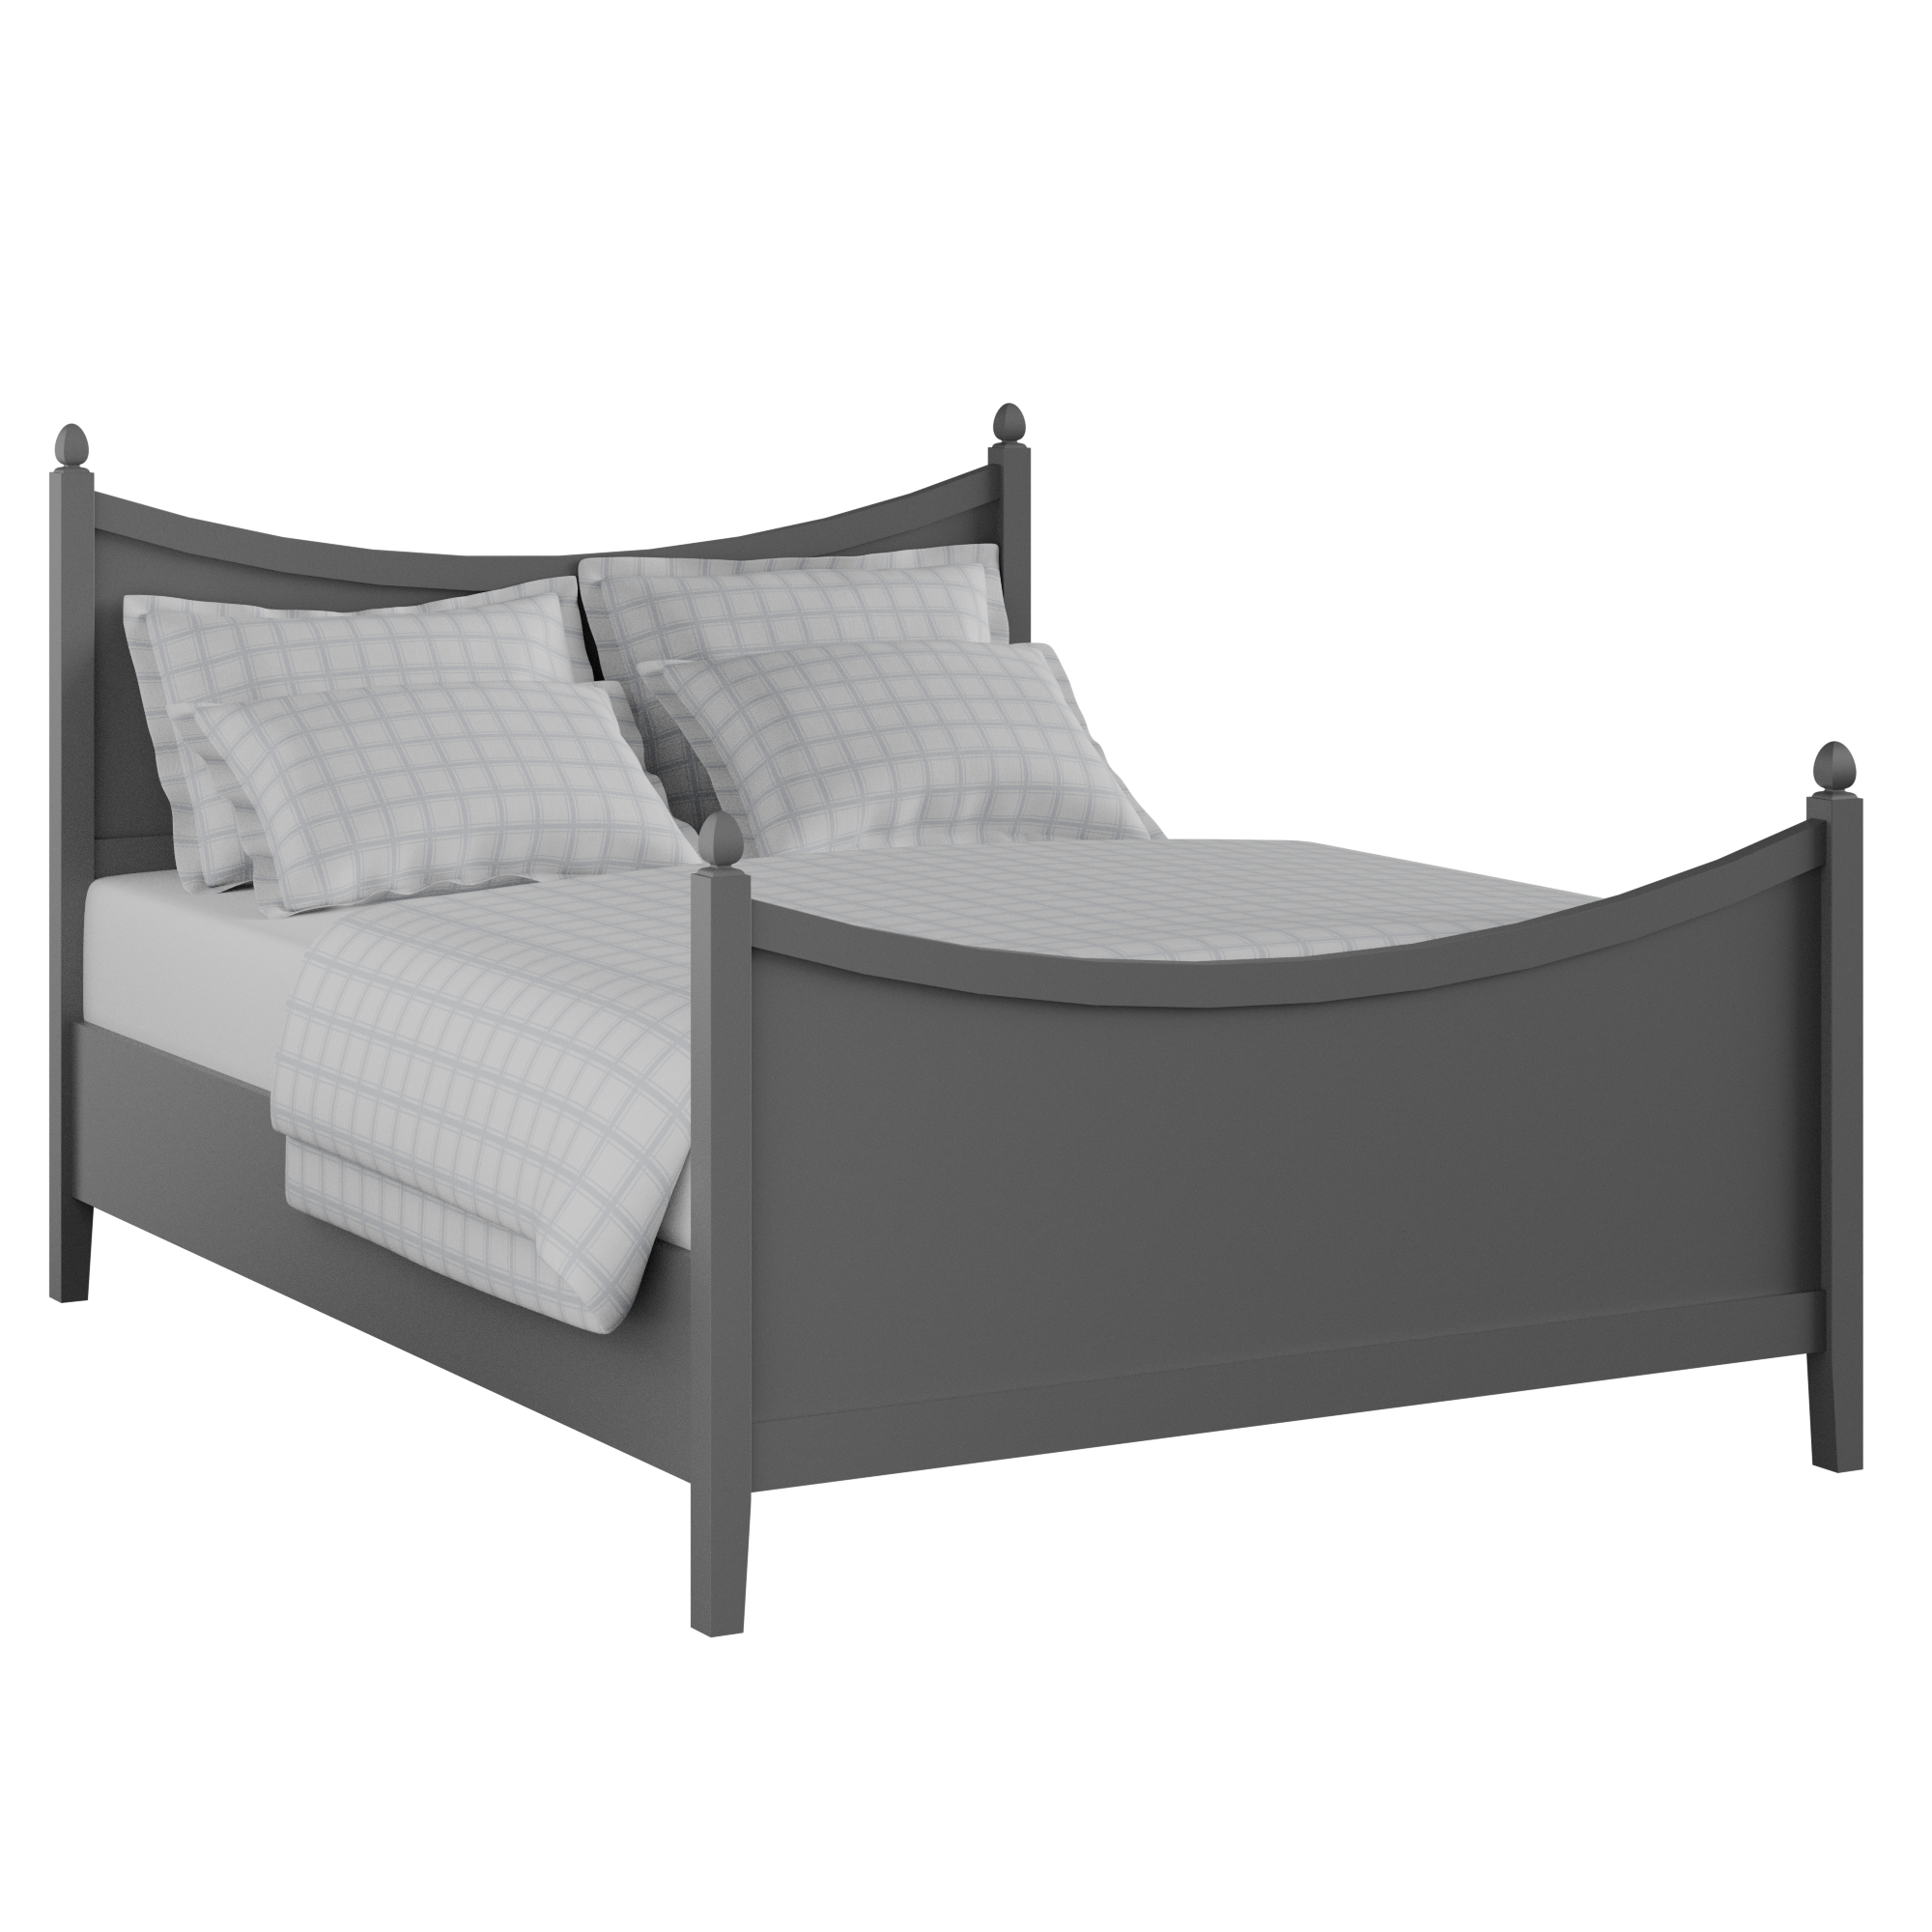 Blake Painted painted wood bed in grey with Juno mattress